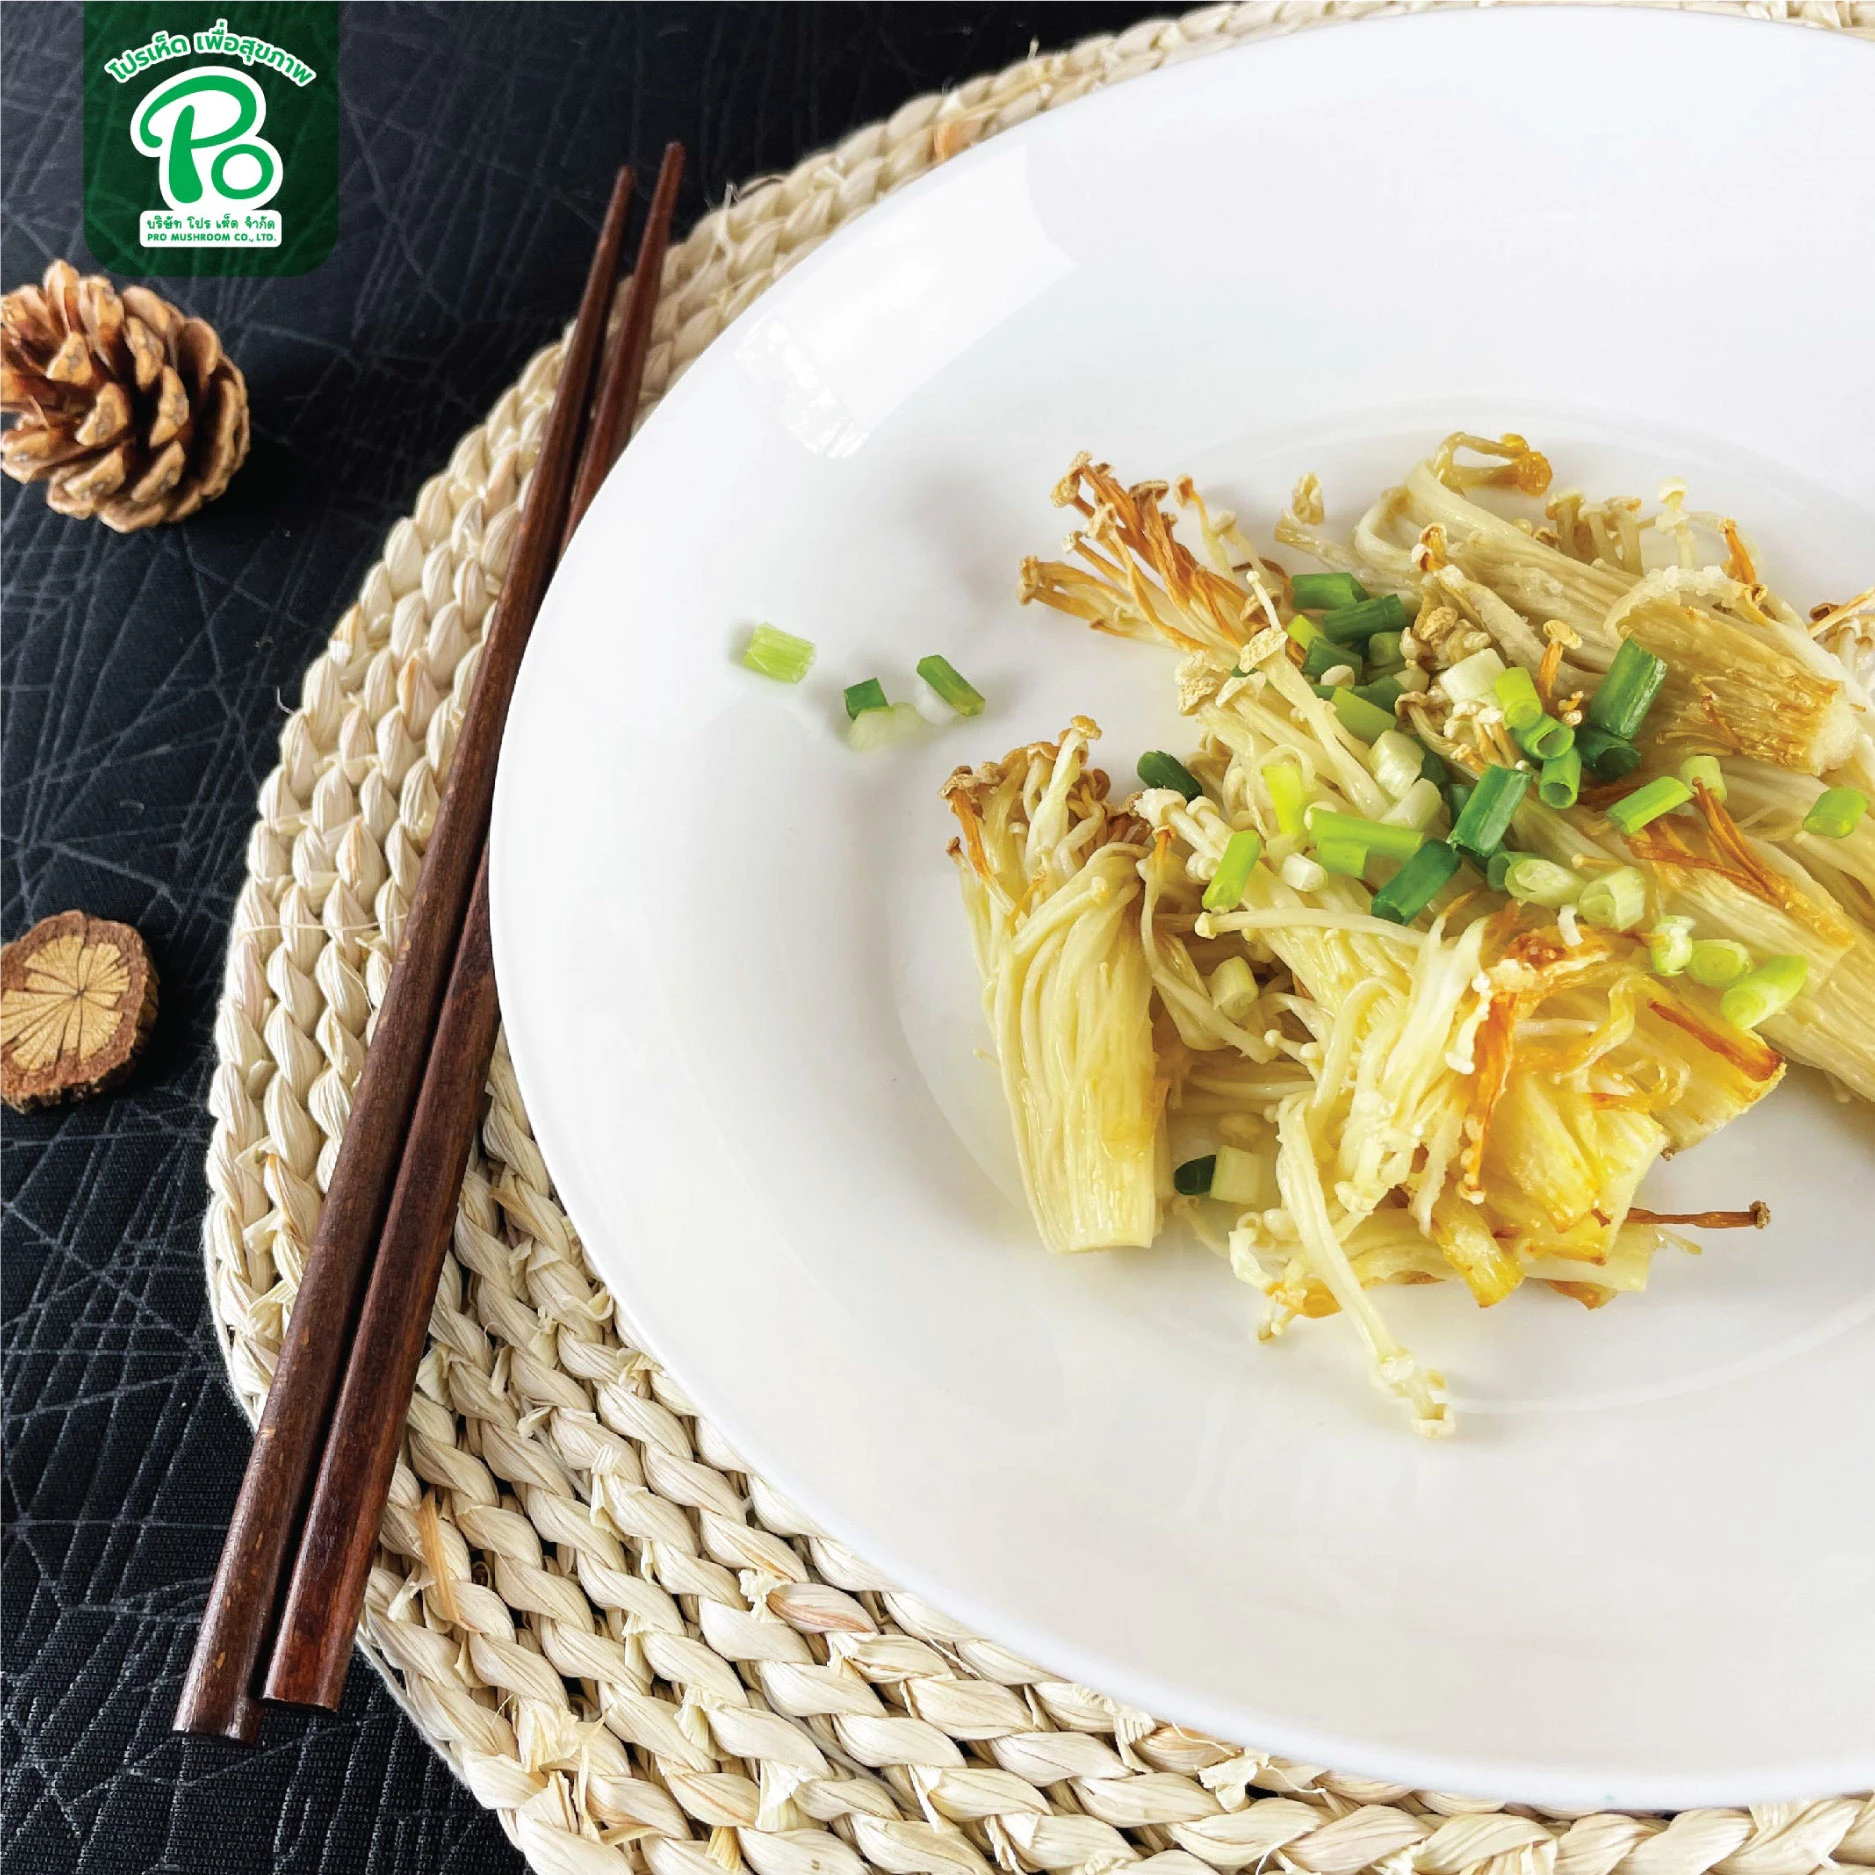 Buttered Enoki Mushroom with the Air fryer